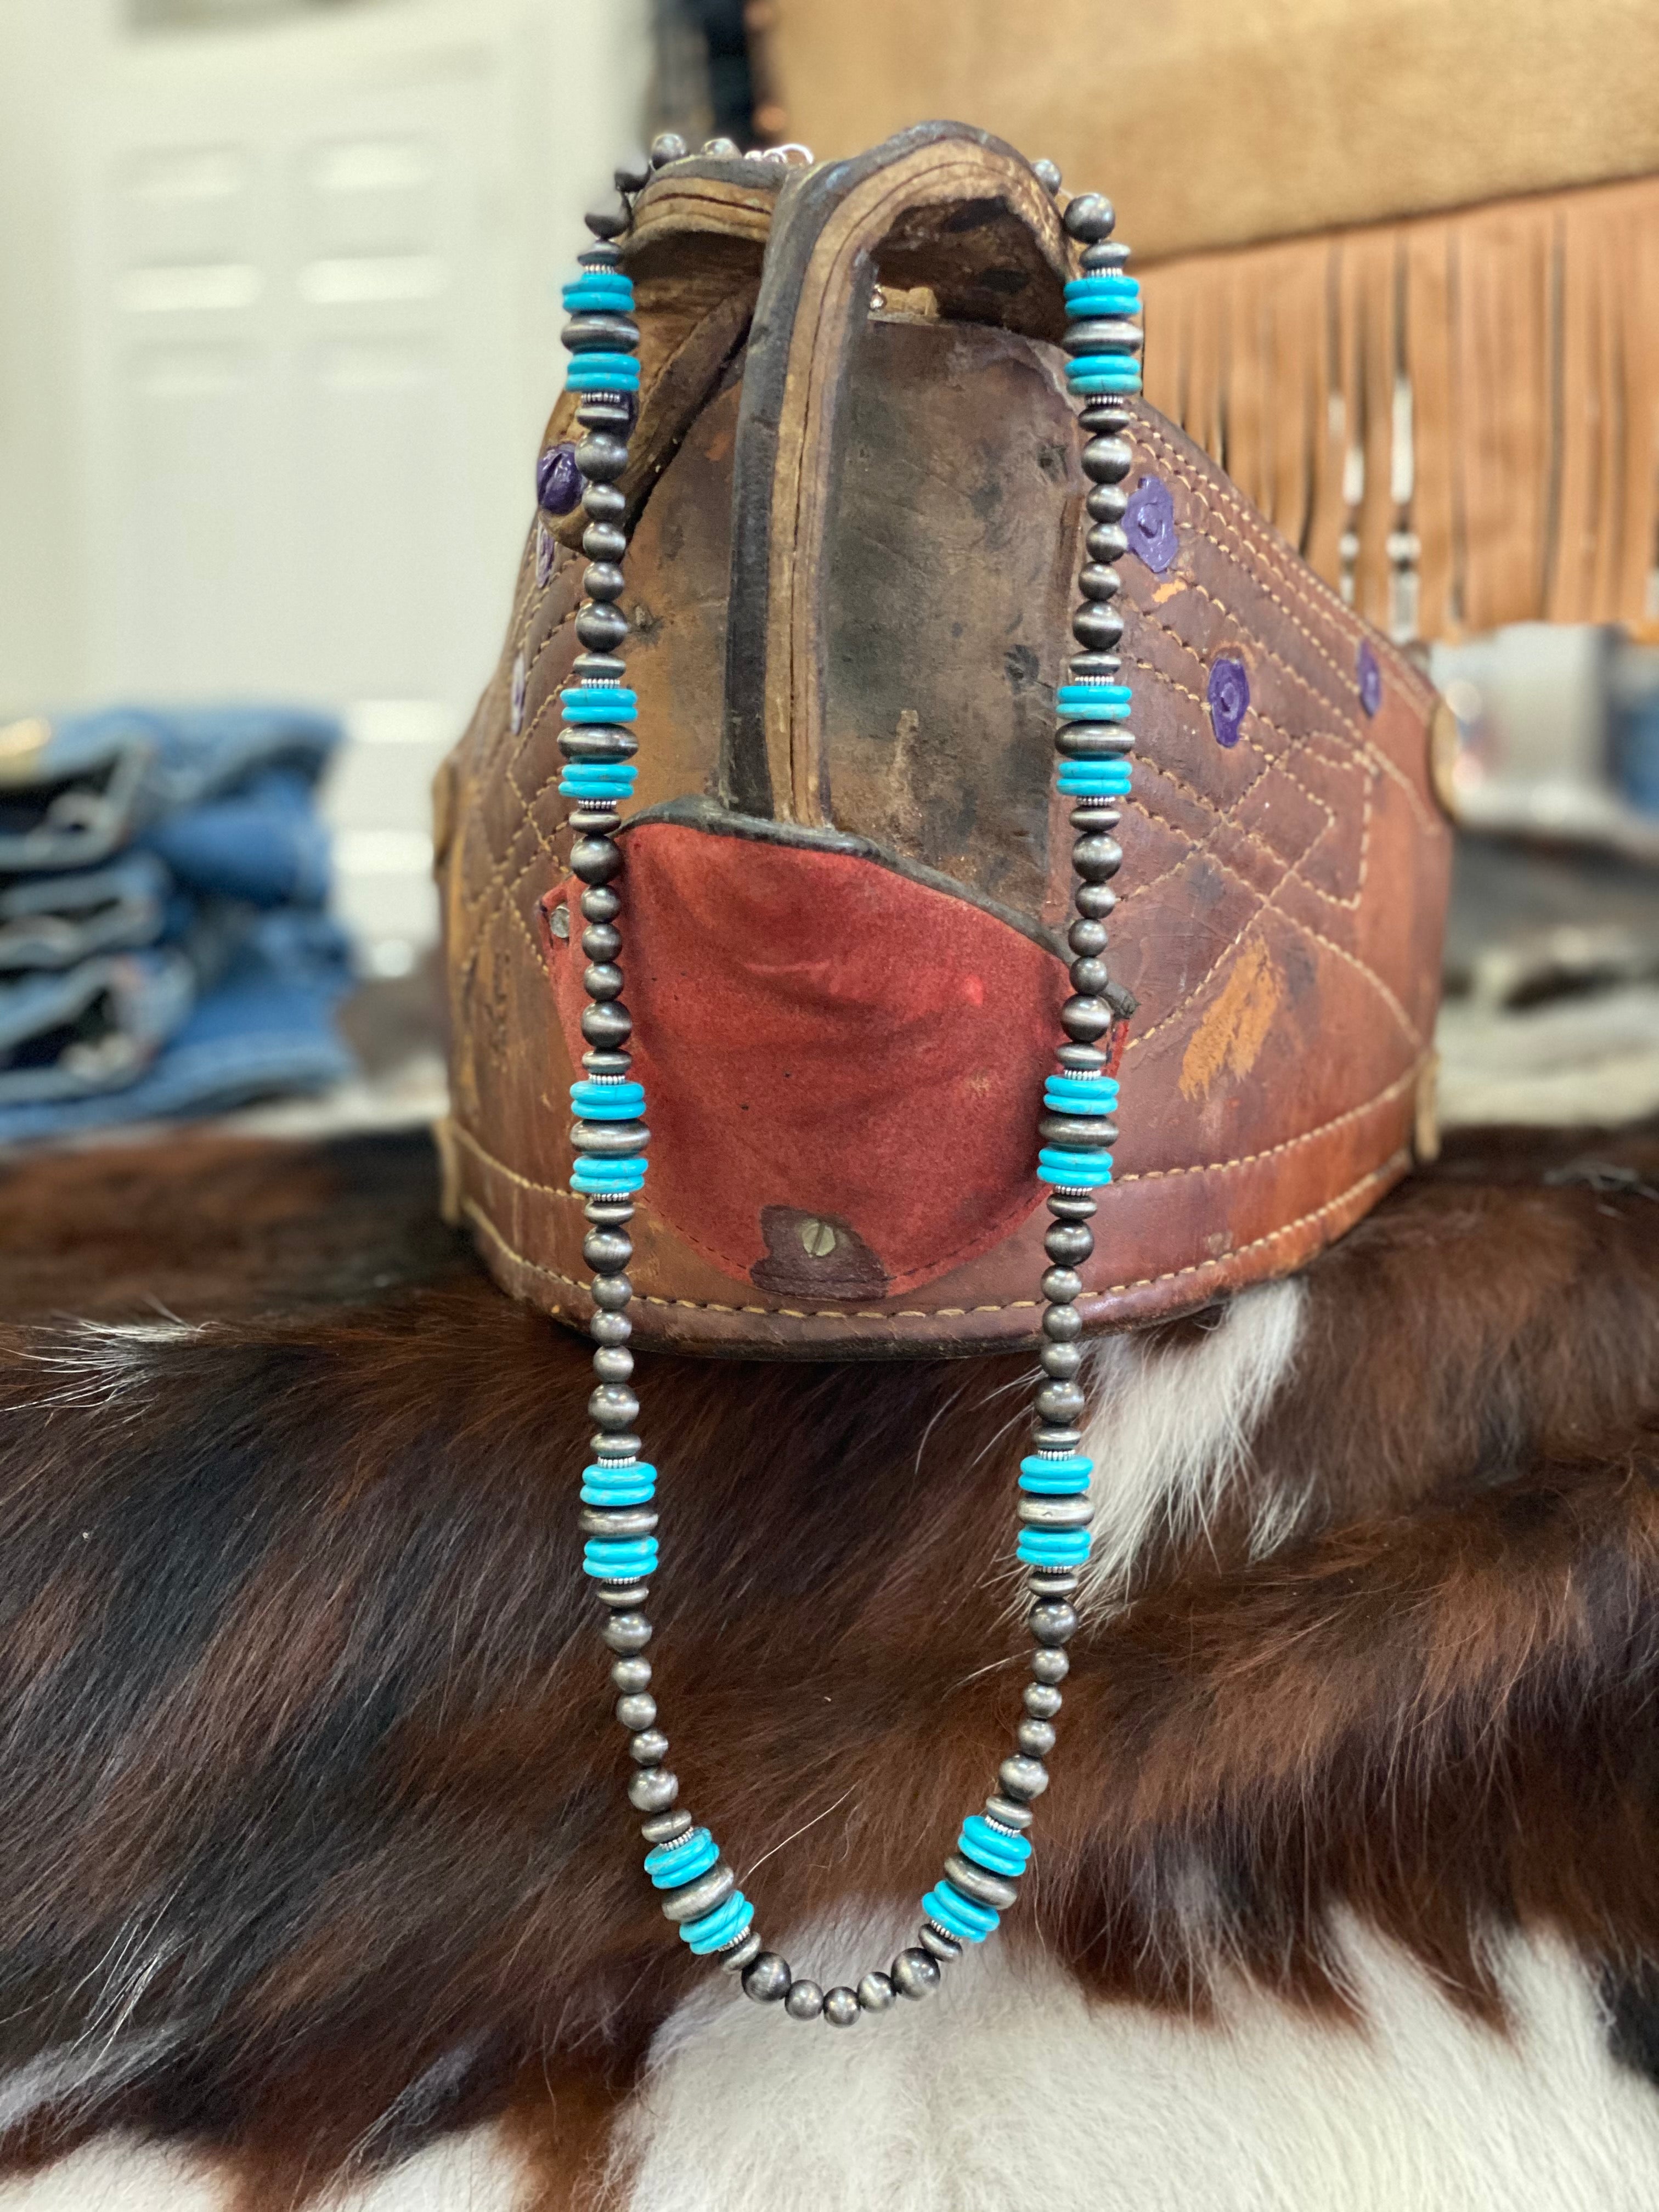 Navajo Pearl Necklace with Turquoise Disc Accents - Pistols and Petticoats